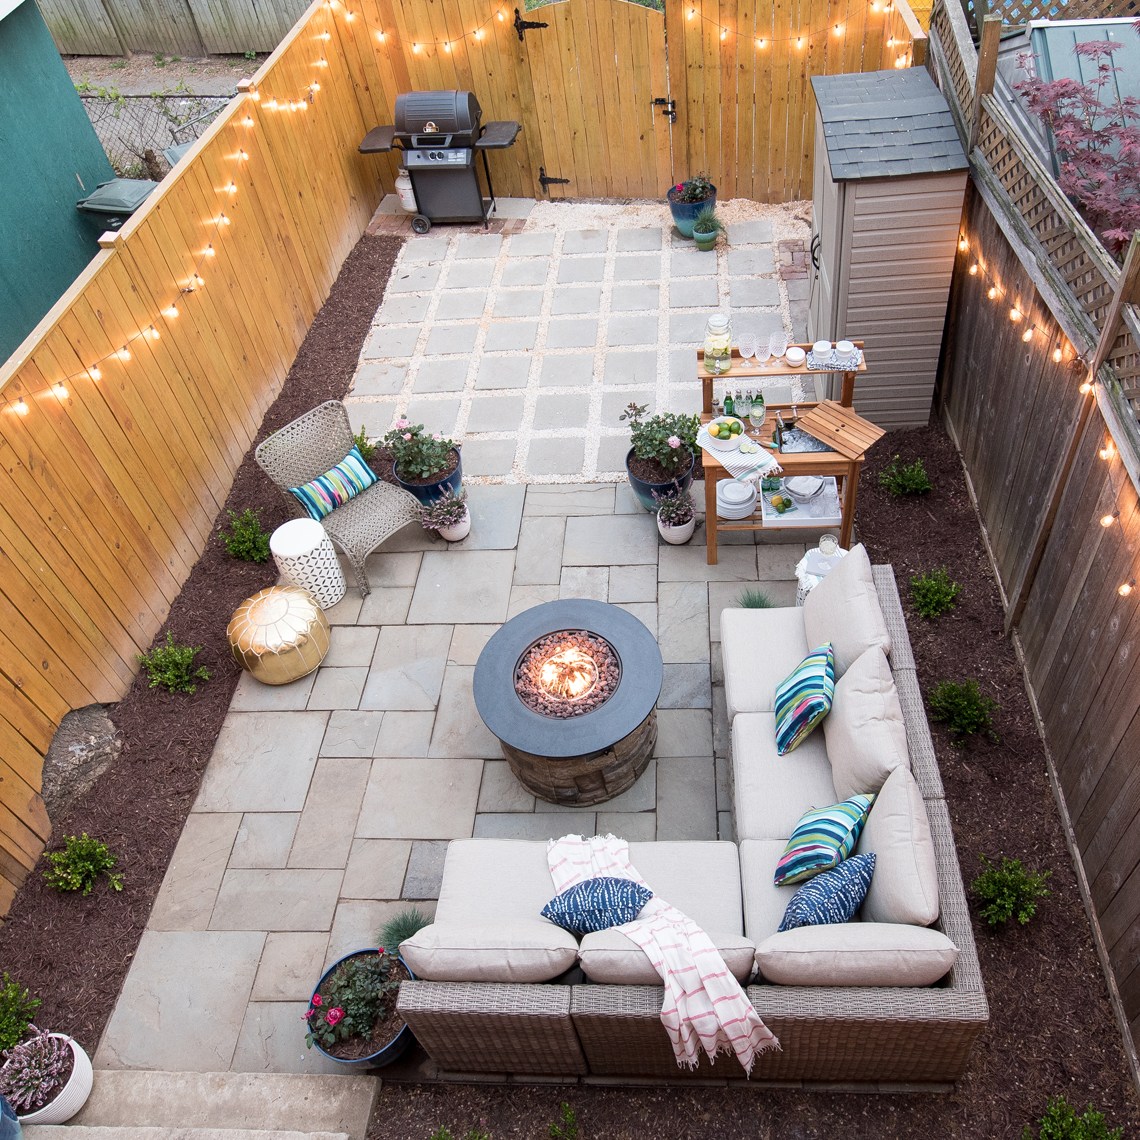 Inspiring Outdoor Fire Pit Areas, Small Backyard Fire Pit